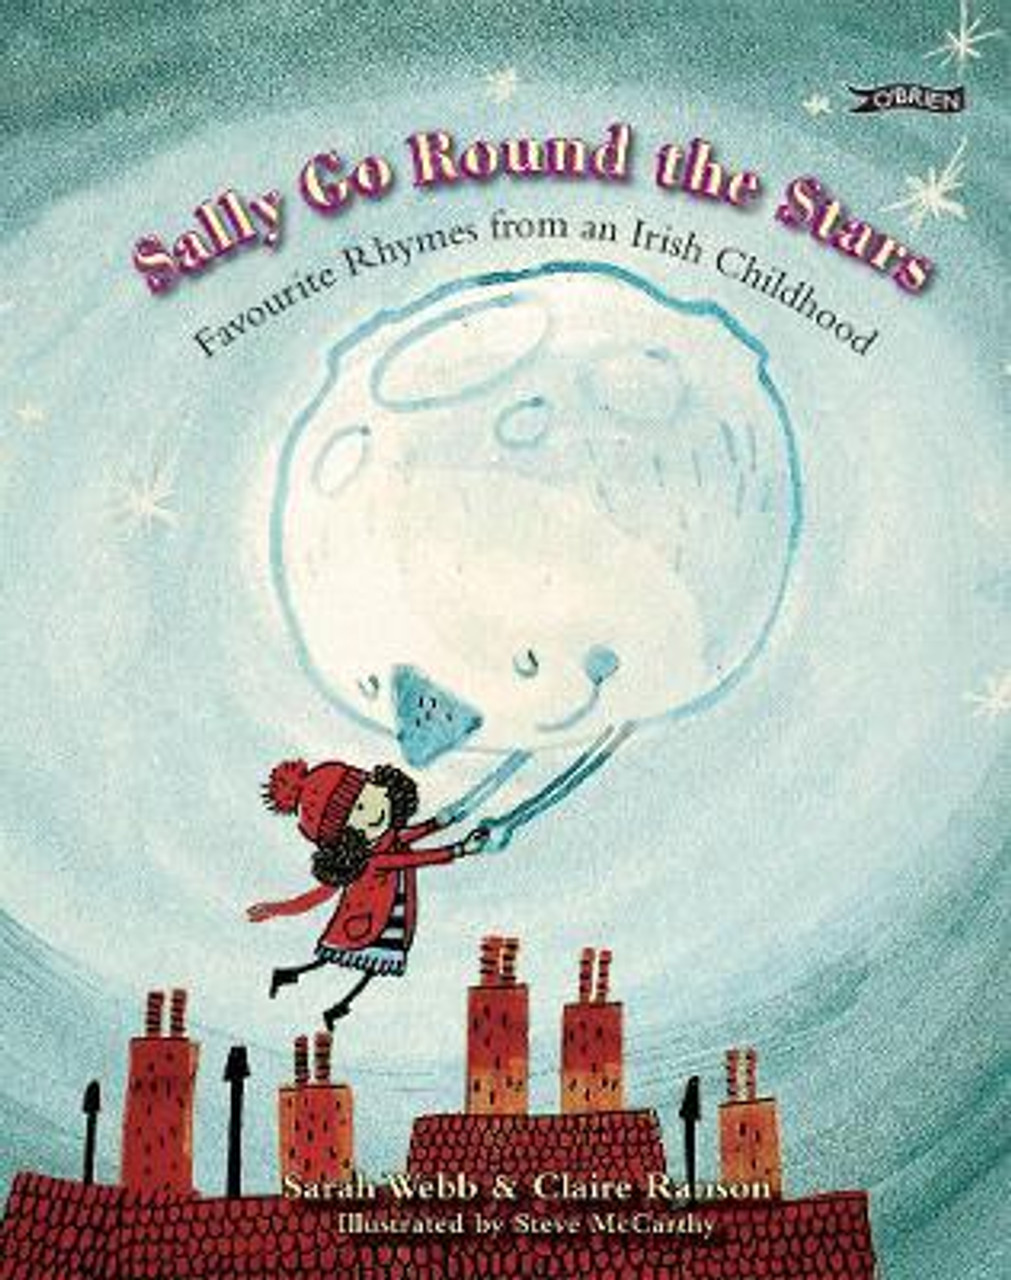 Sarah Webb / Sally Go Round The Stars : Favourite Rhymes from an Irish Childhood (Children's Coffee Table book)